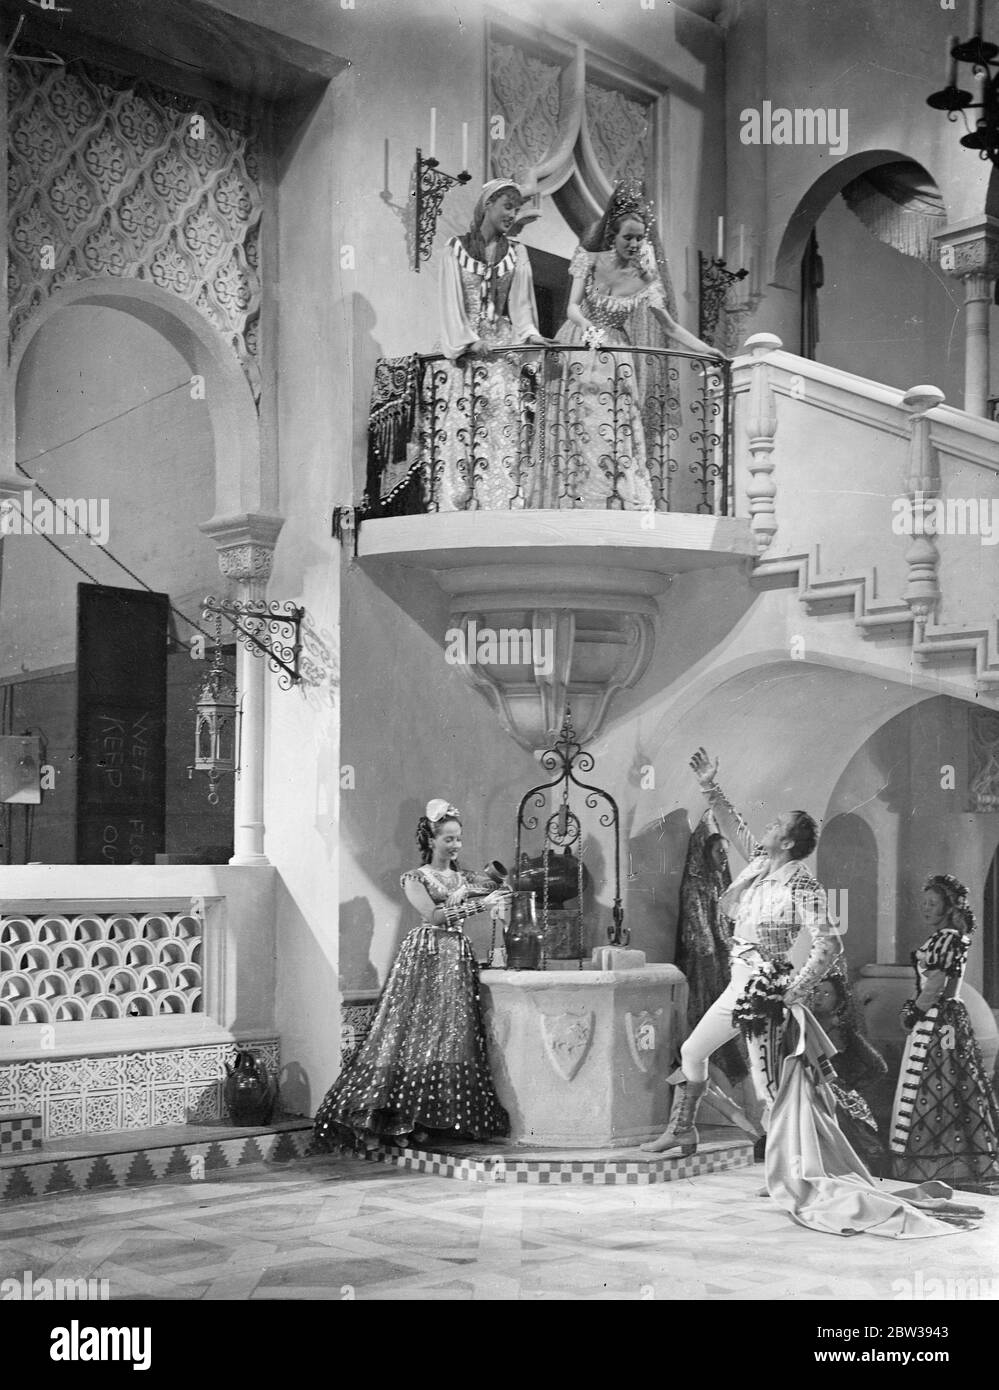 Douglas Fairbanks starts work on his new British film . Production of Douglas Fairbanks ' s new film ' The Private Life of Don Juan ' has been started at the Imperial Film Production ' s studios . Merle Oberon and Benita Hume are also in the cast . Photo shows , Douglas Fairbanks and Merle Oberon (below) with other ladies of the cast in one of the scenes . 5 April 1934 30s, 30's, 1930s, 1930's, thirties, nineteen thirties Stock Photo